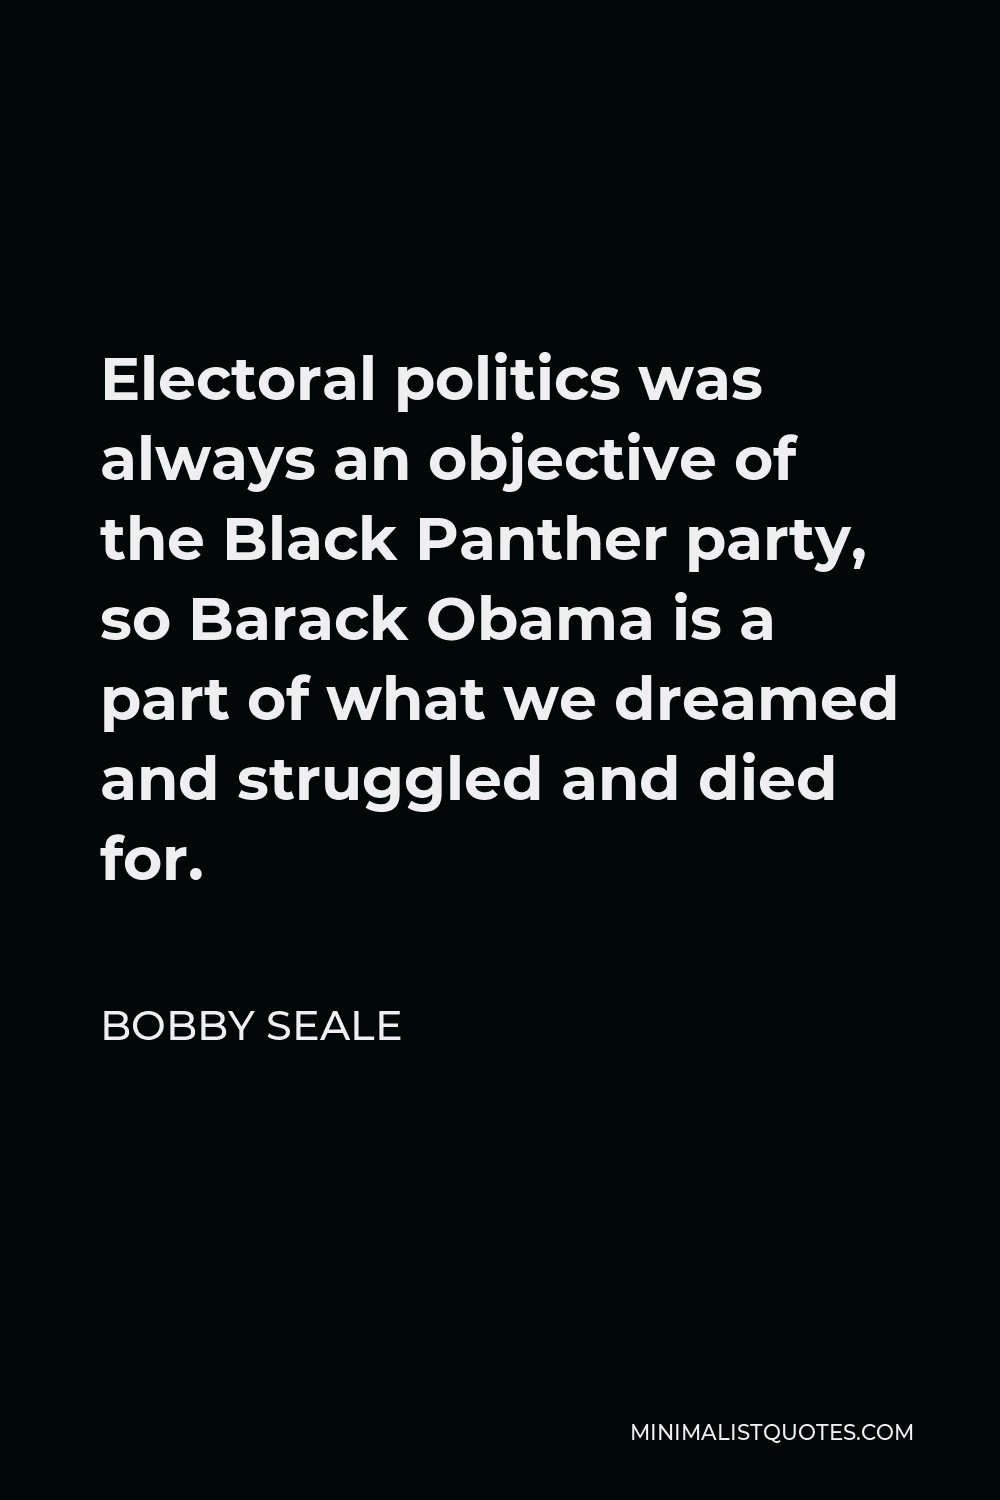 Bobby Seale Quote - Electoral politics was always an objective of the Black Panther party, so Barack Obama is a part of what we dreamed and struggled and died for.